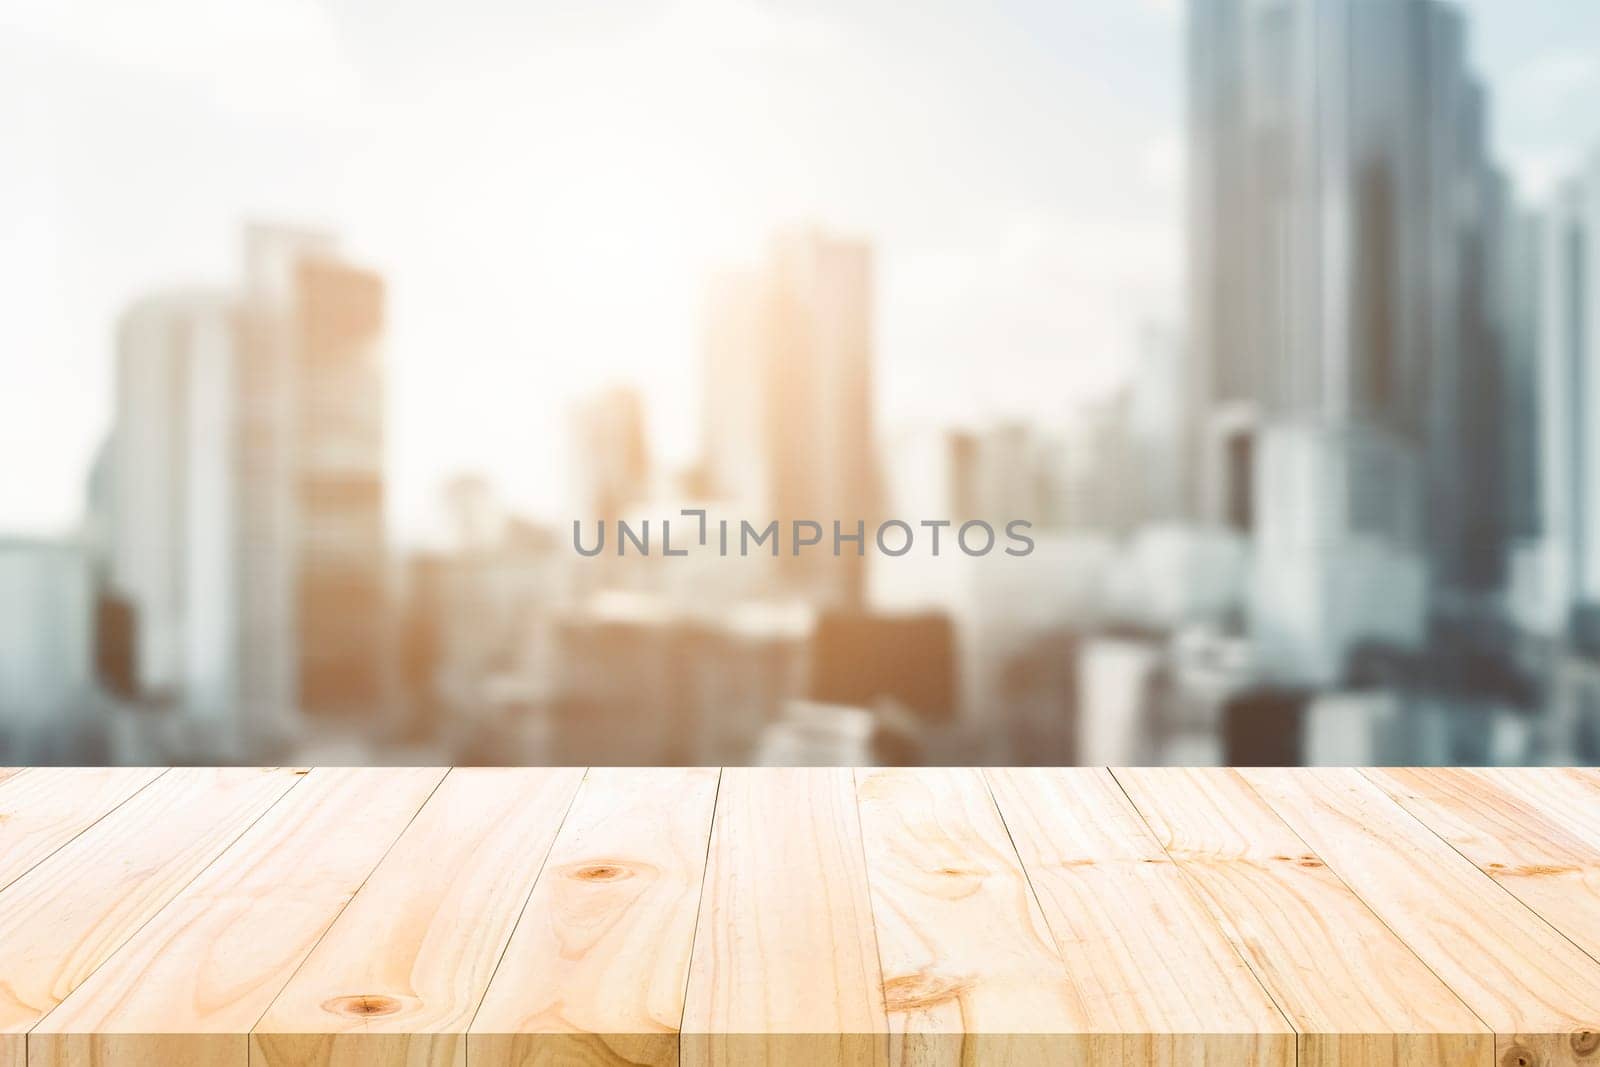 Pine wood table top overlooking a blurred cityscape, ideal for display or montage with urban context.